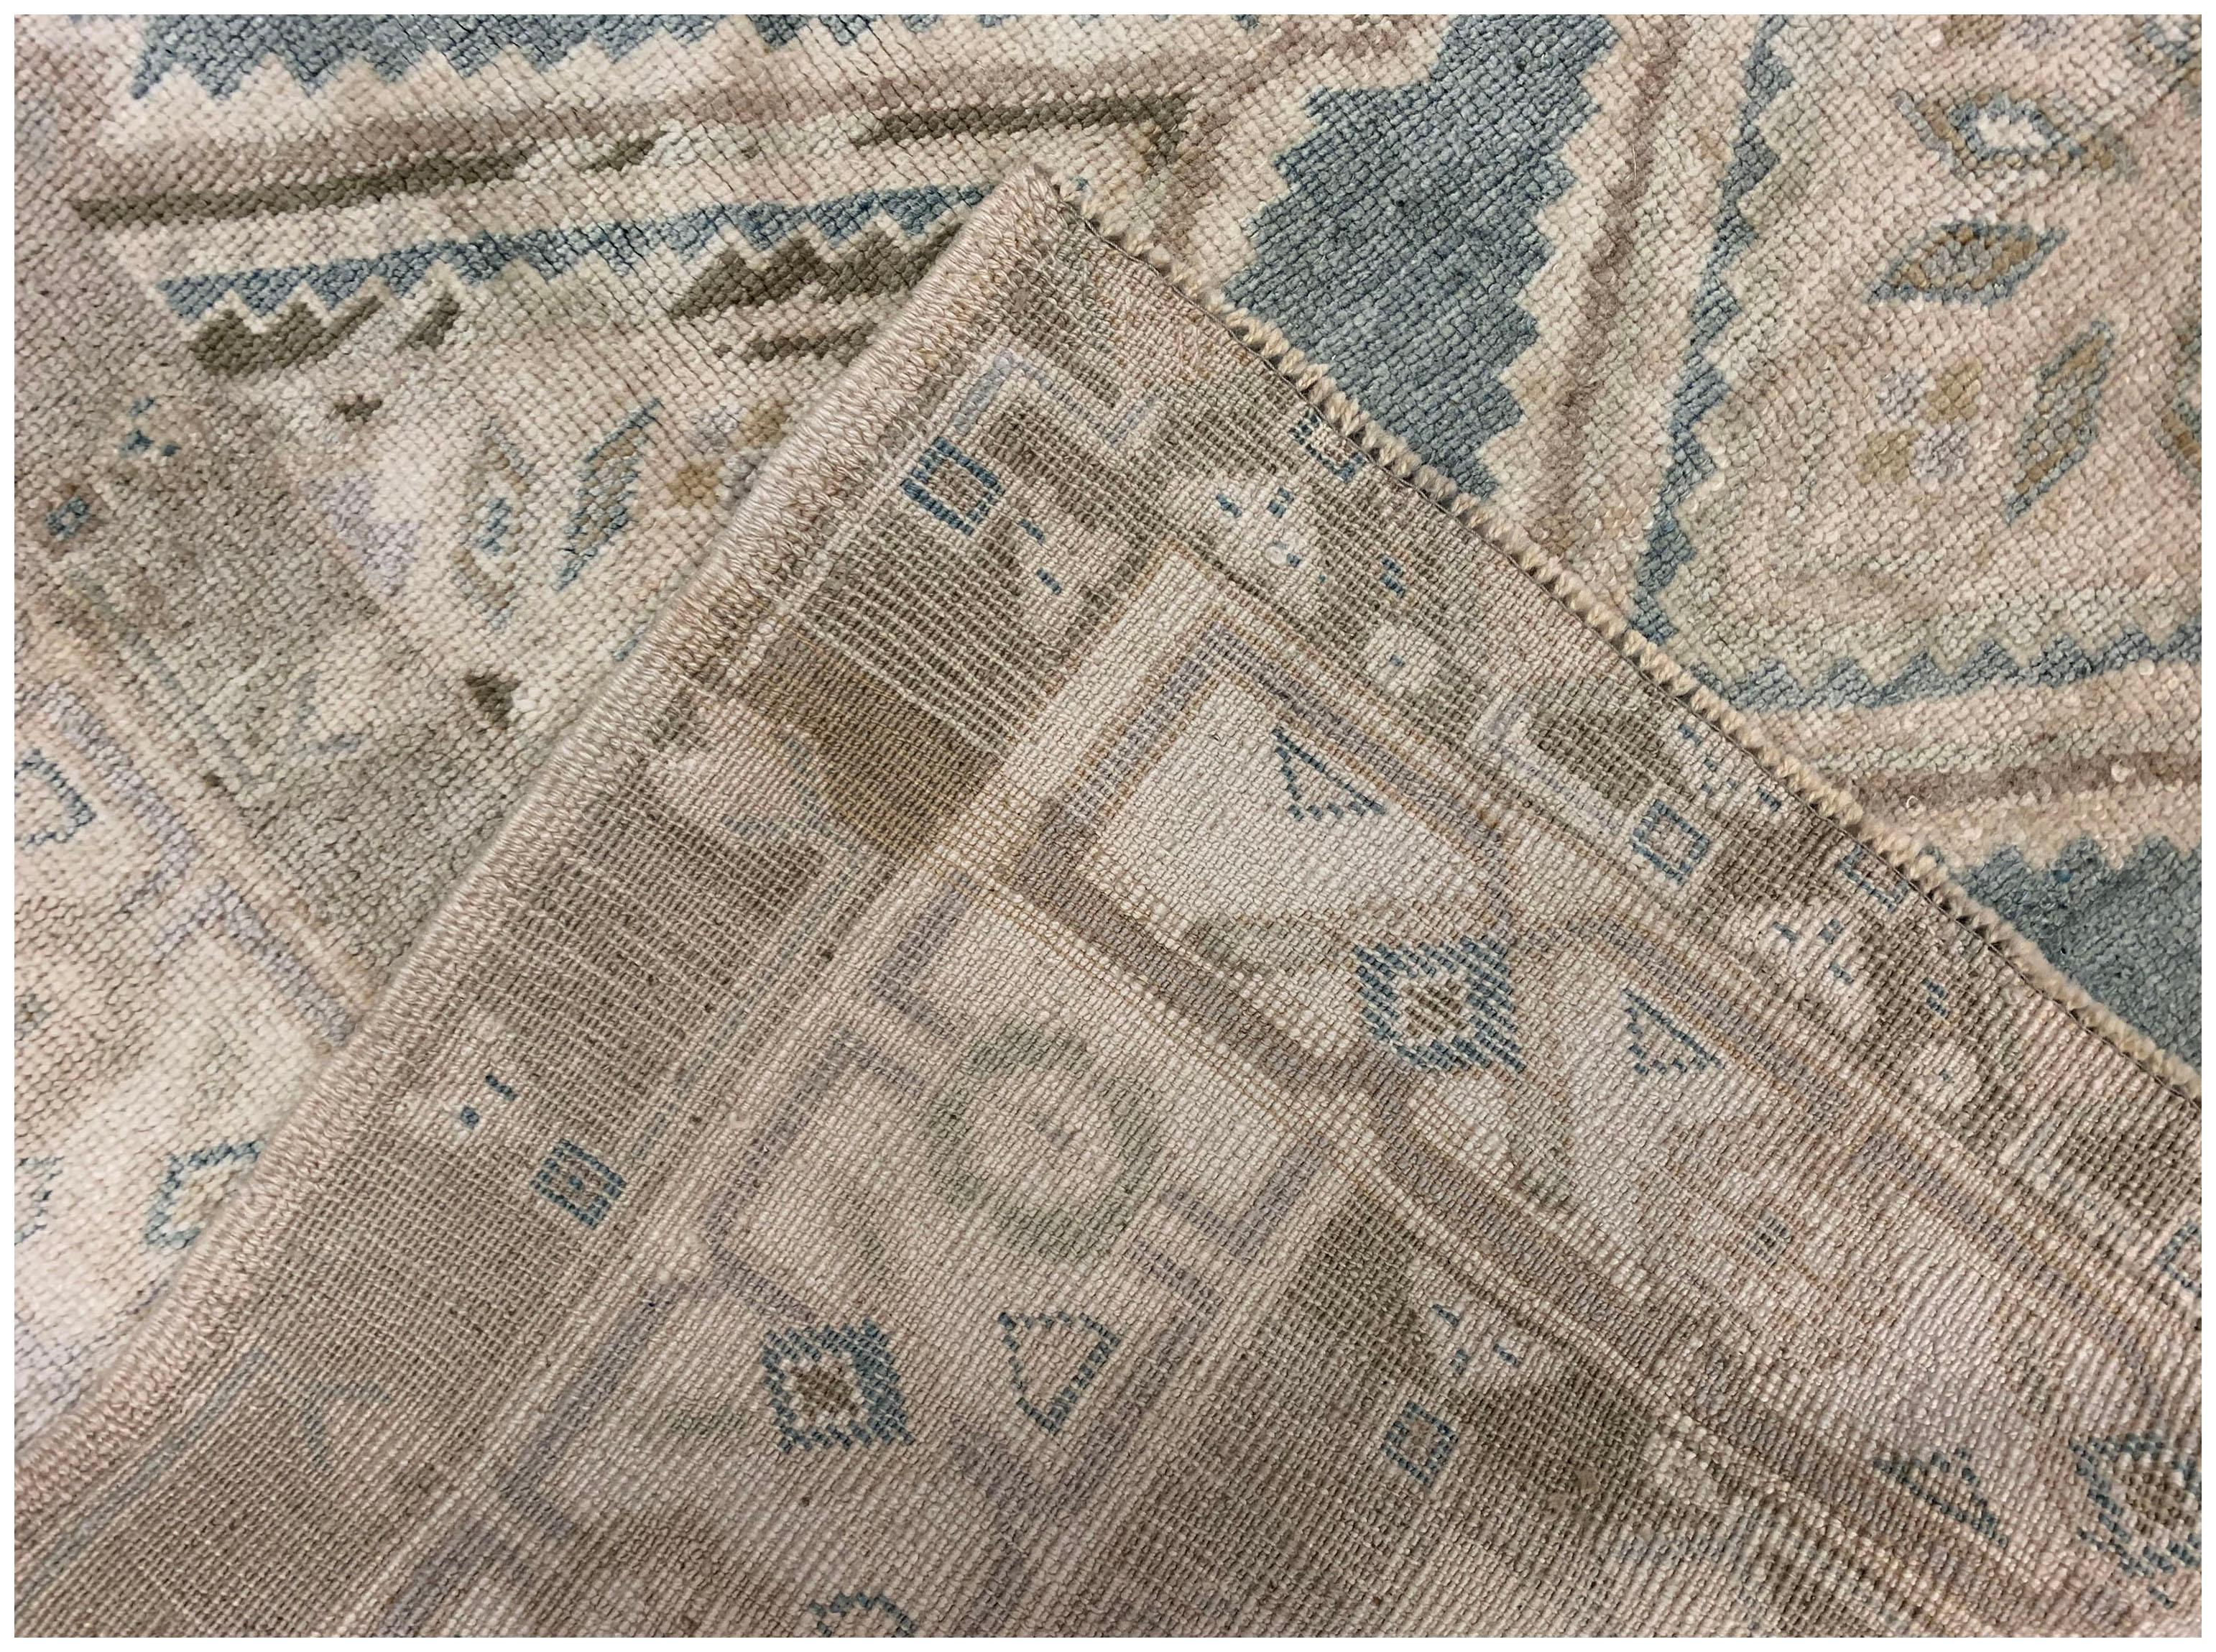 Vintage Turkish Oushak area rug, 4'7 x 6'6. Oushak's are known for their soft palettes combined with eccentric drawing. Oushak in western Turkey has the longest continuous rug weaving history, stretching back at least to the mid-fifteenth century.